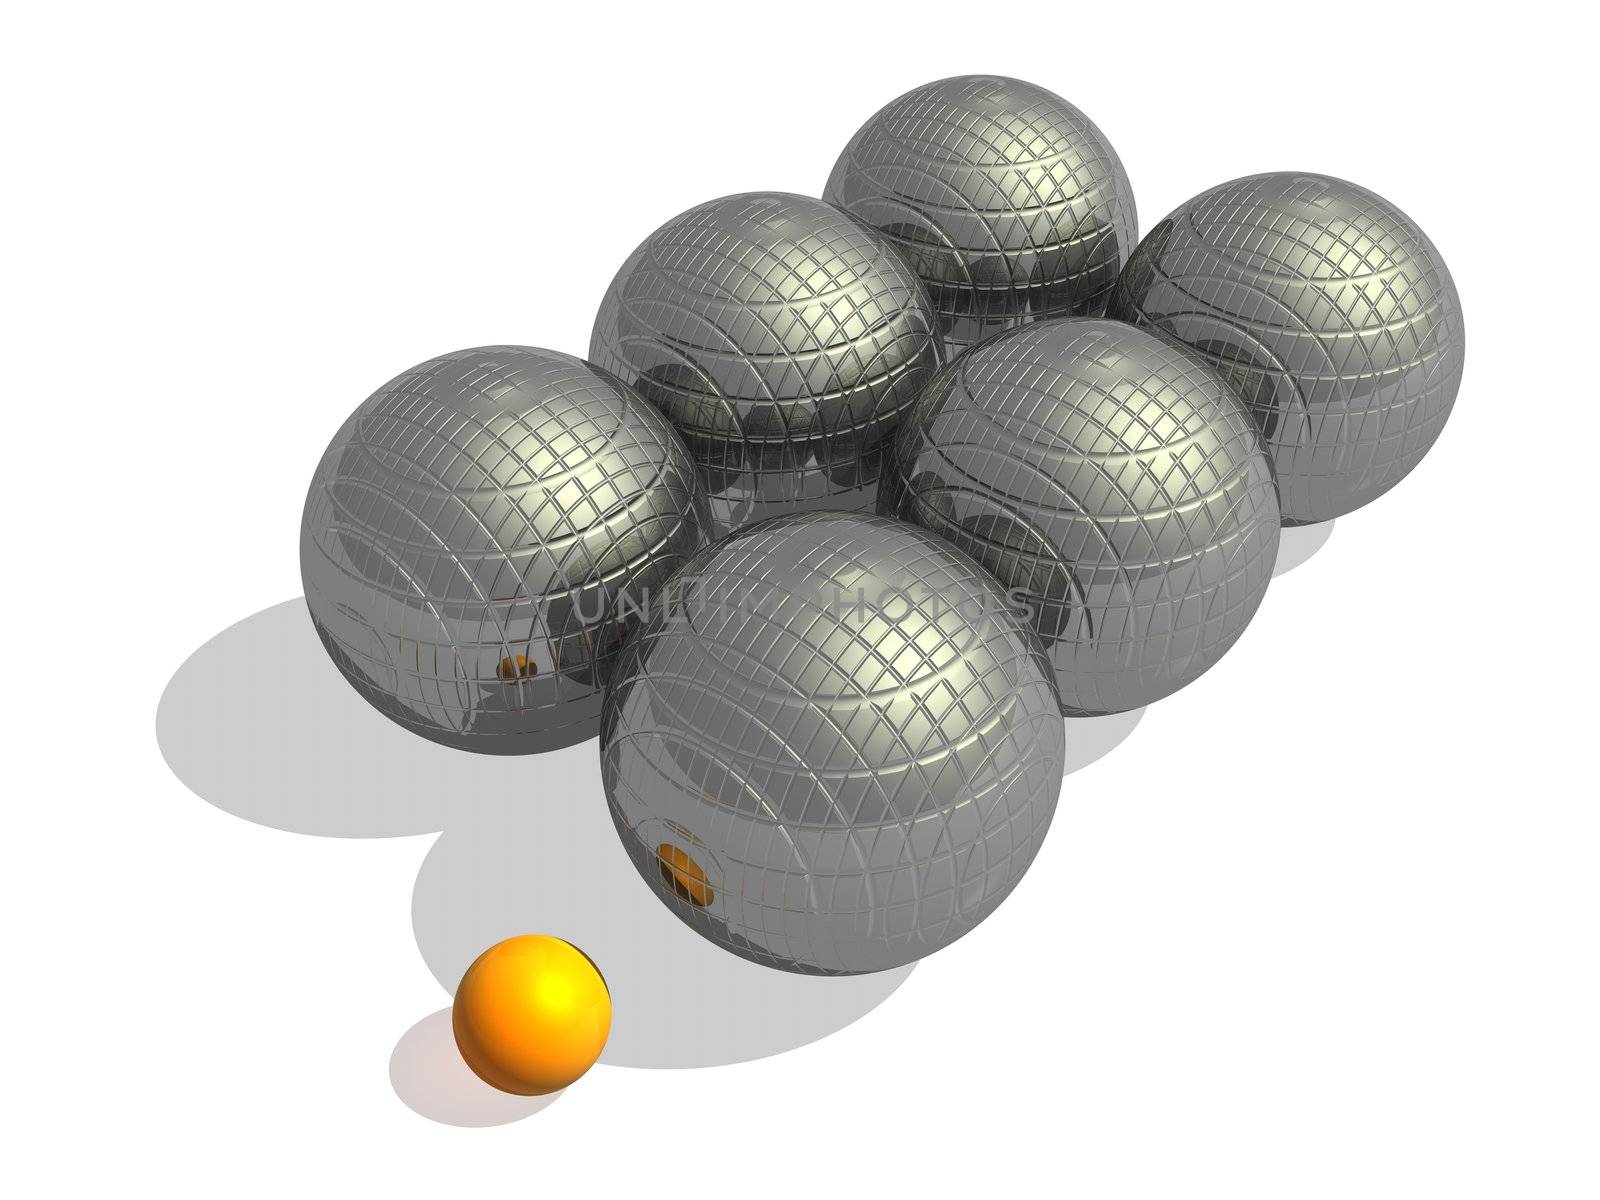 Six big metallic petanque balls and a small orange jack in a white background